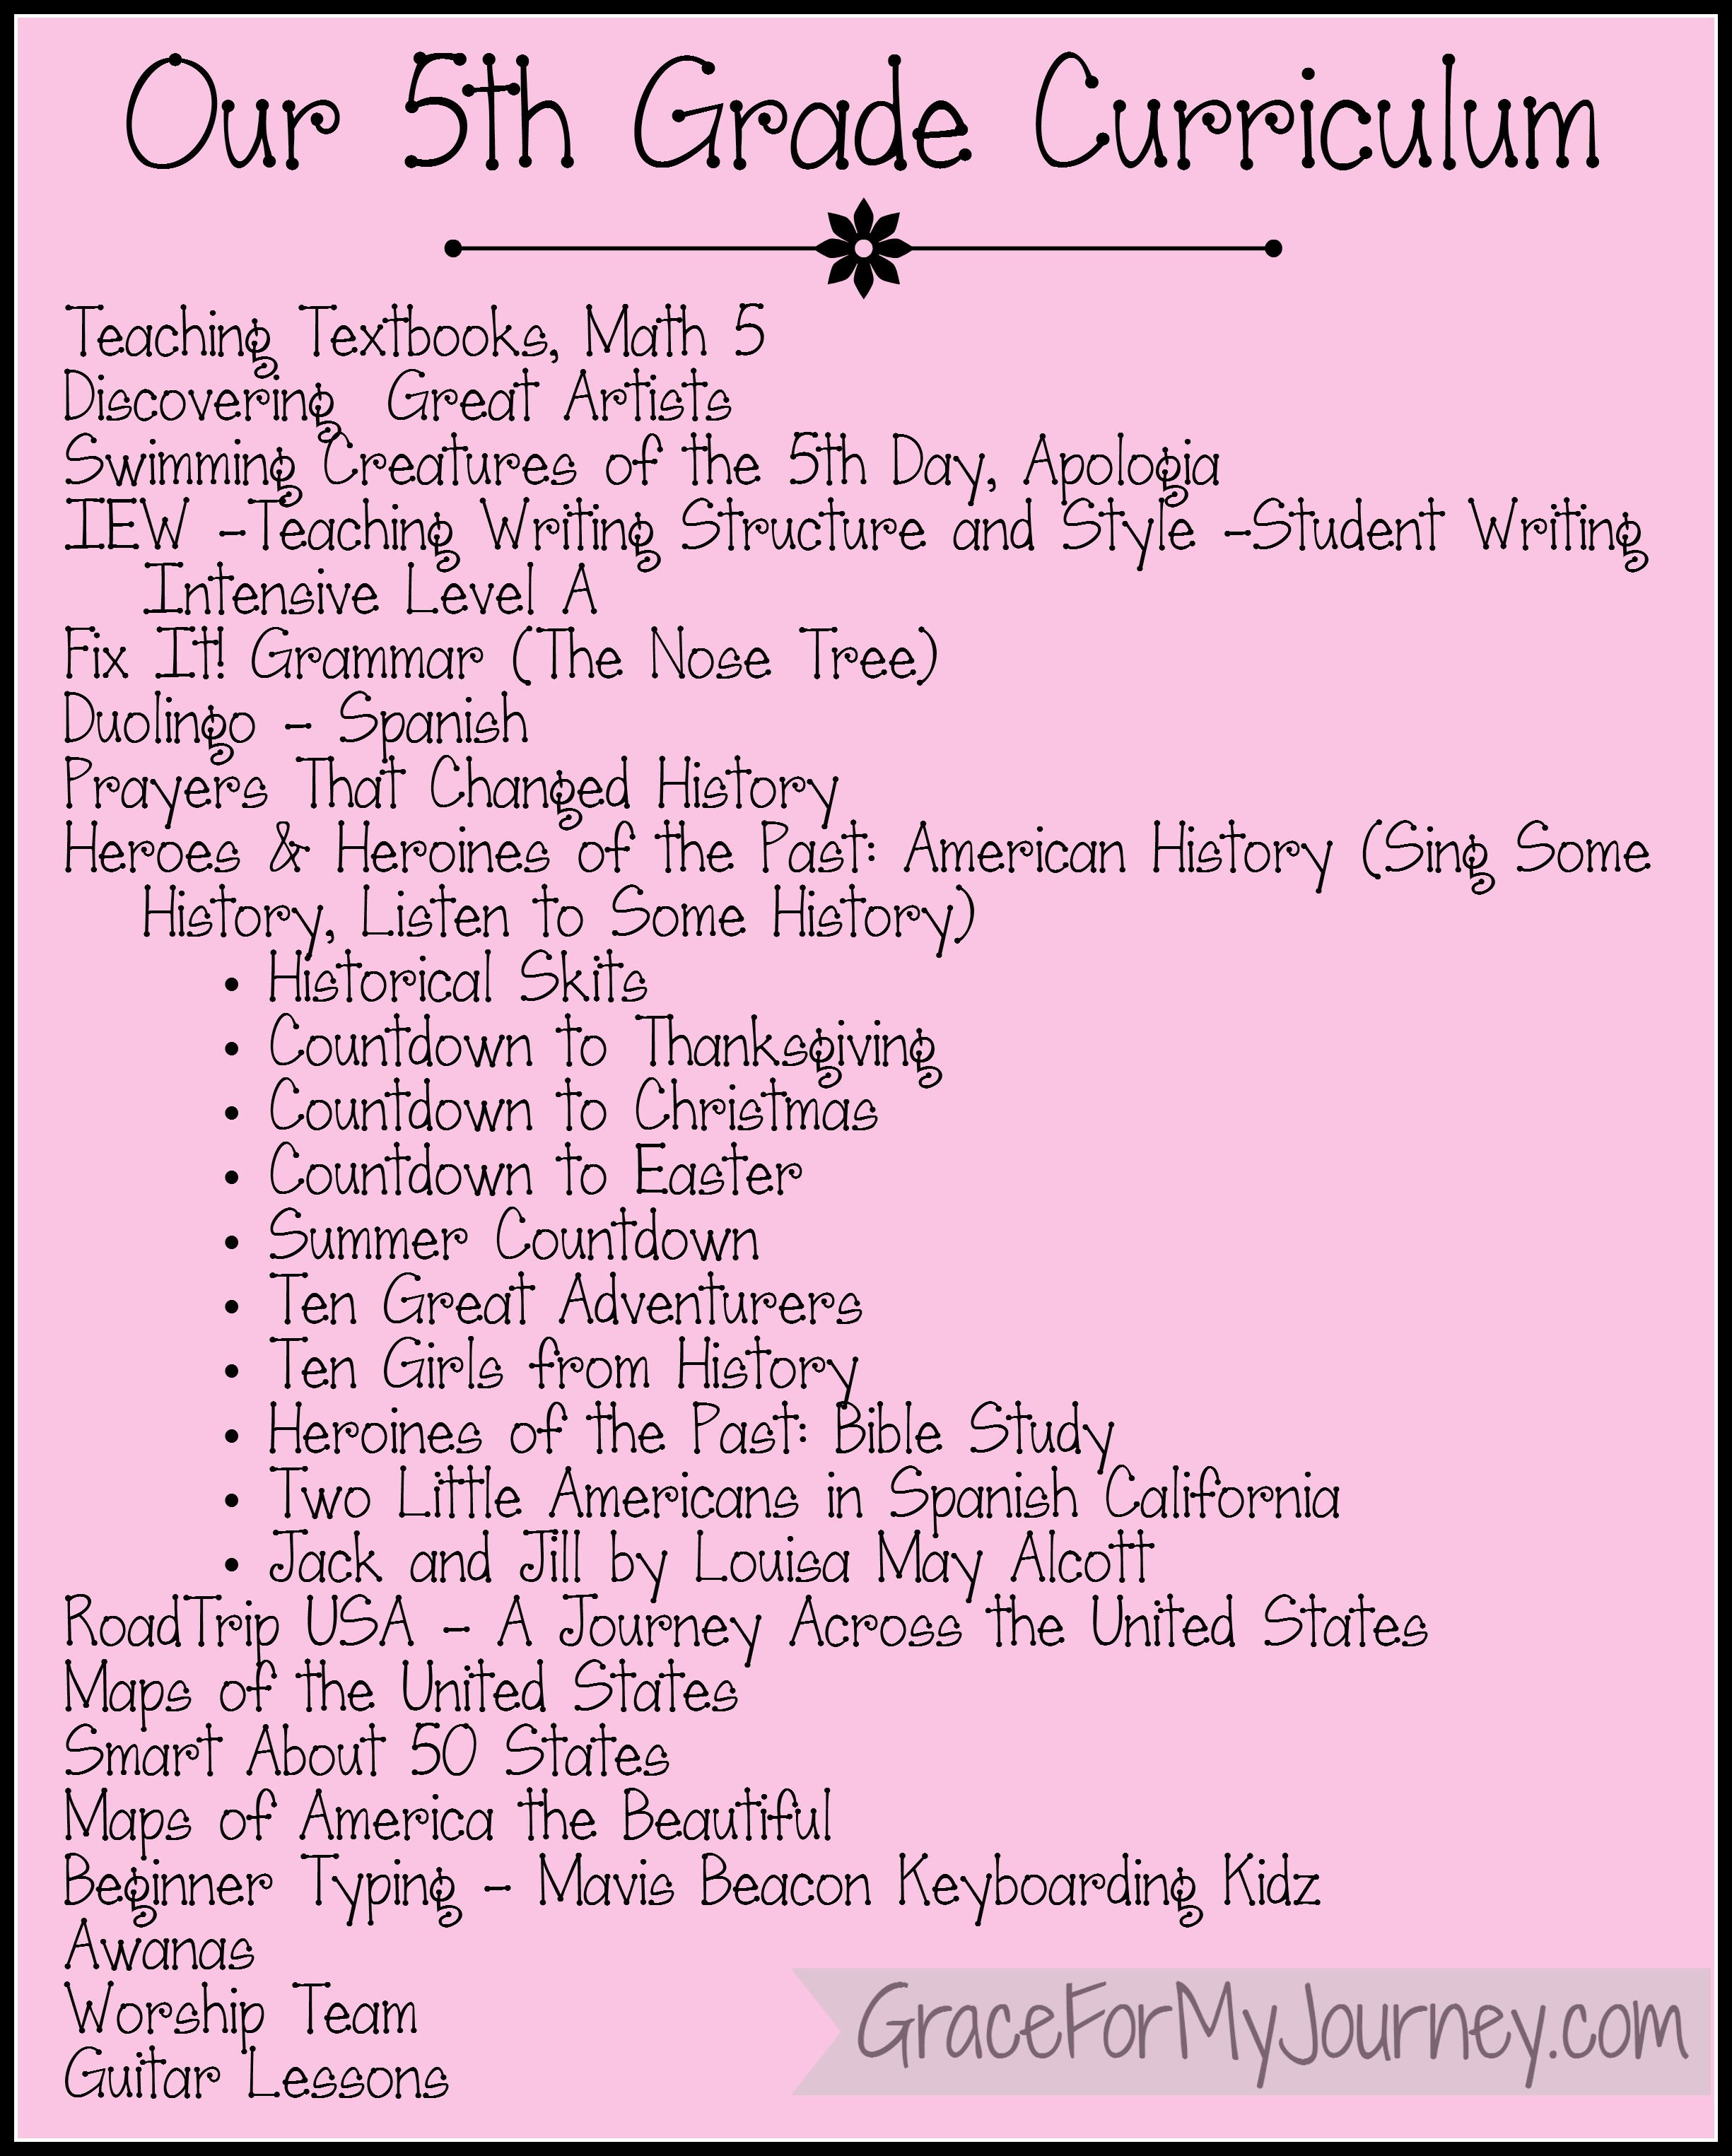 What was on your homeschool curriculum list last year?